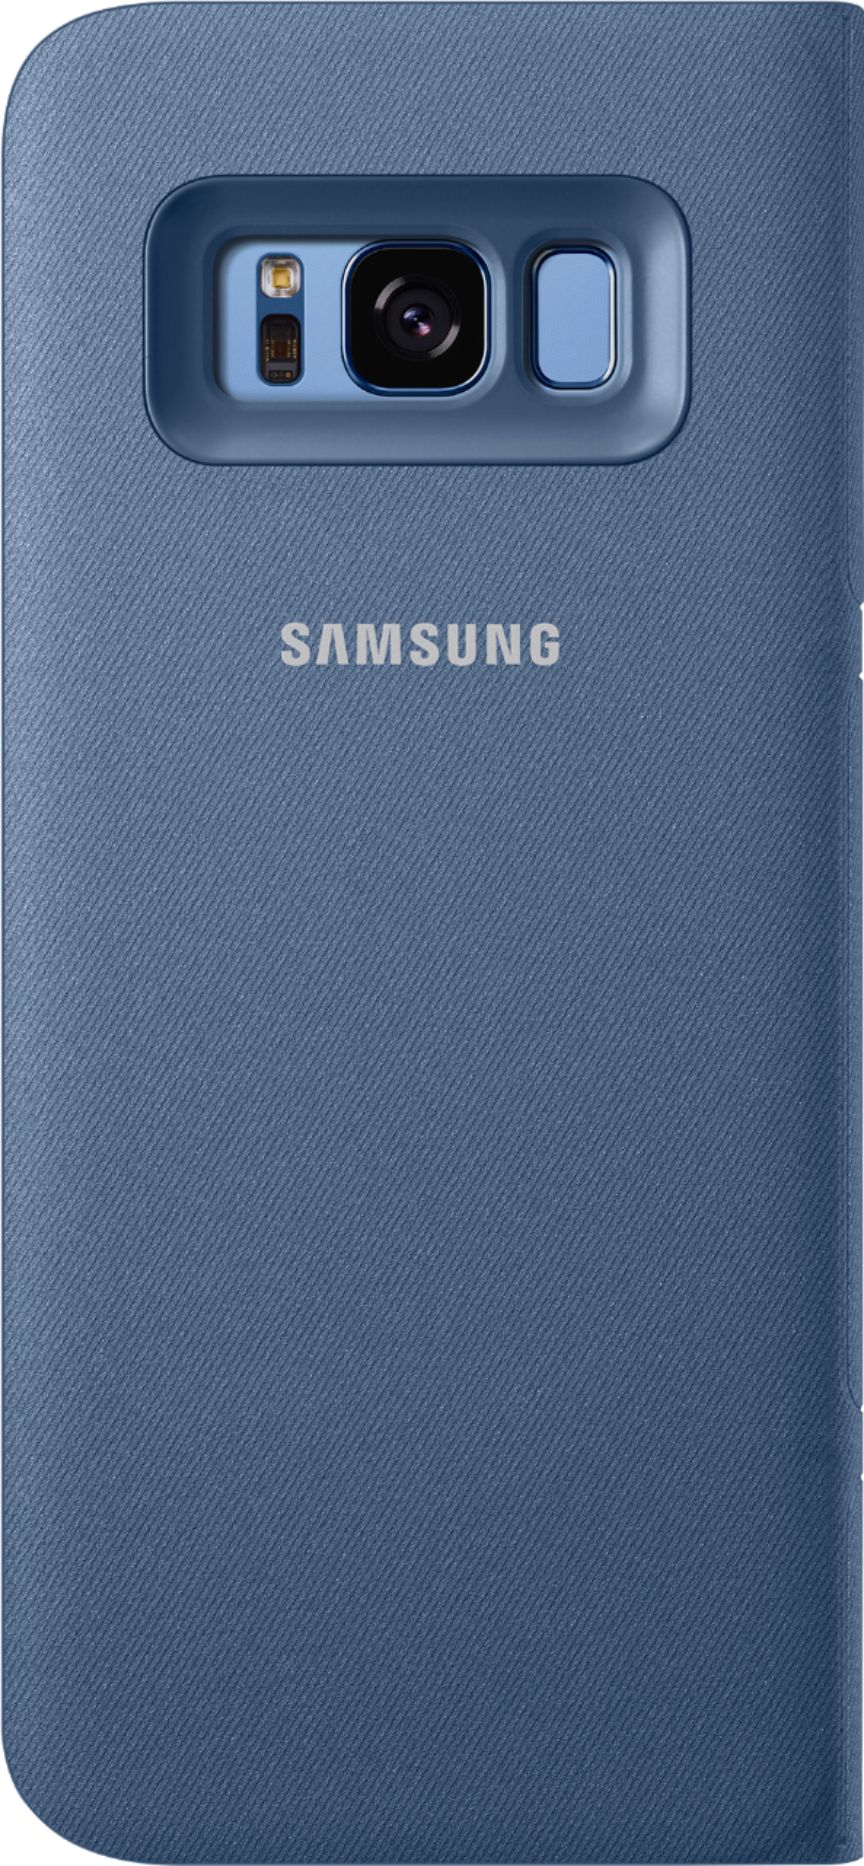 Samsung - LED Wallet Cover for Samsung Galaxy S8 - Blue